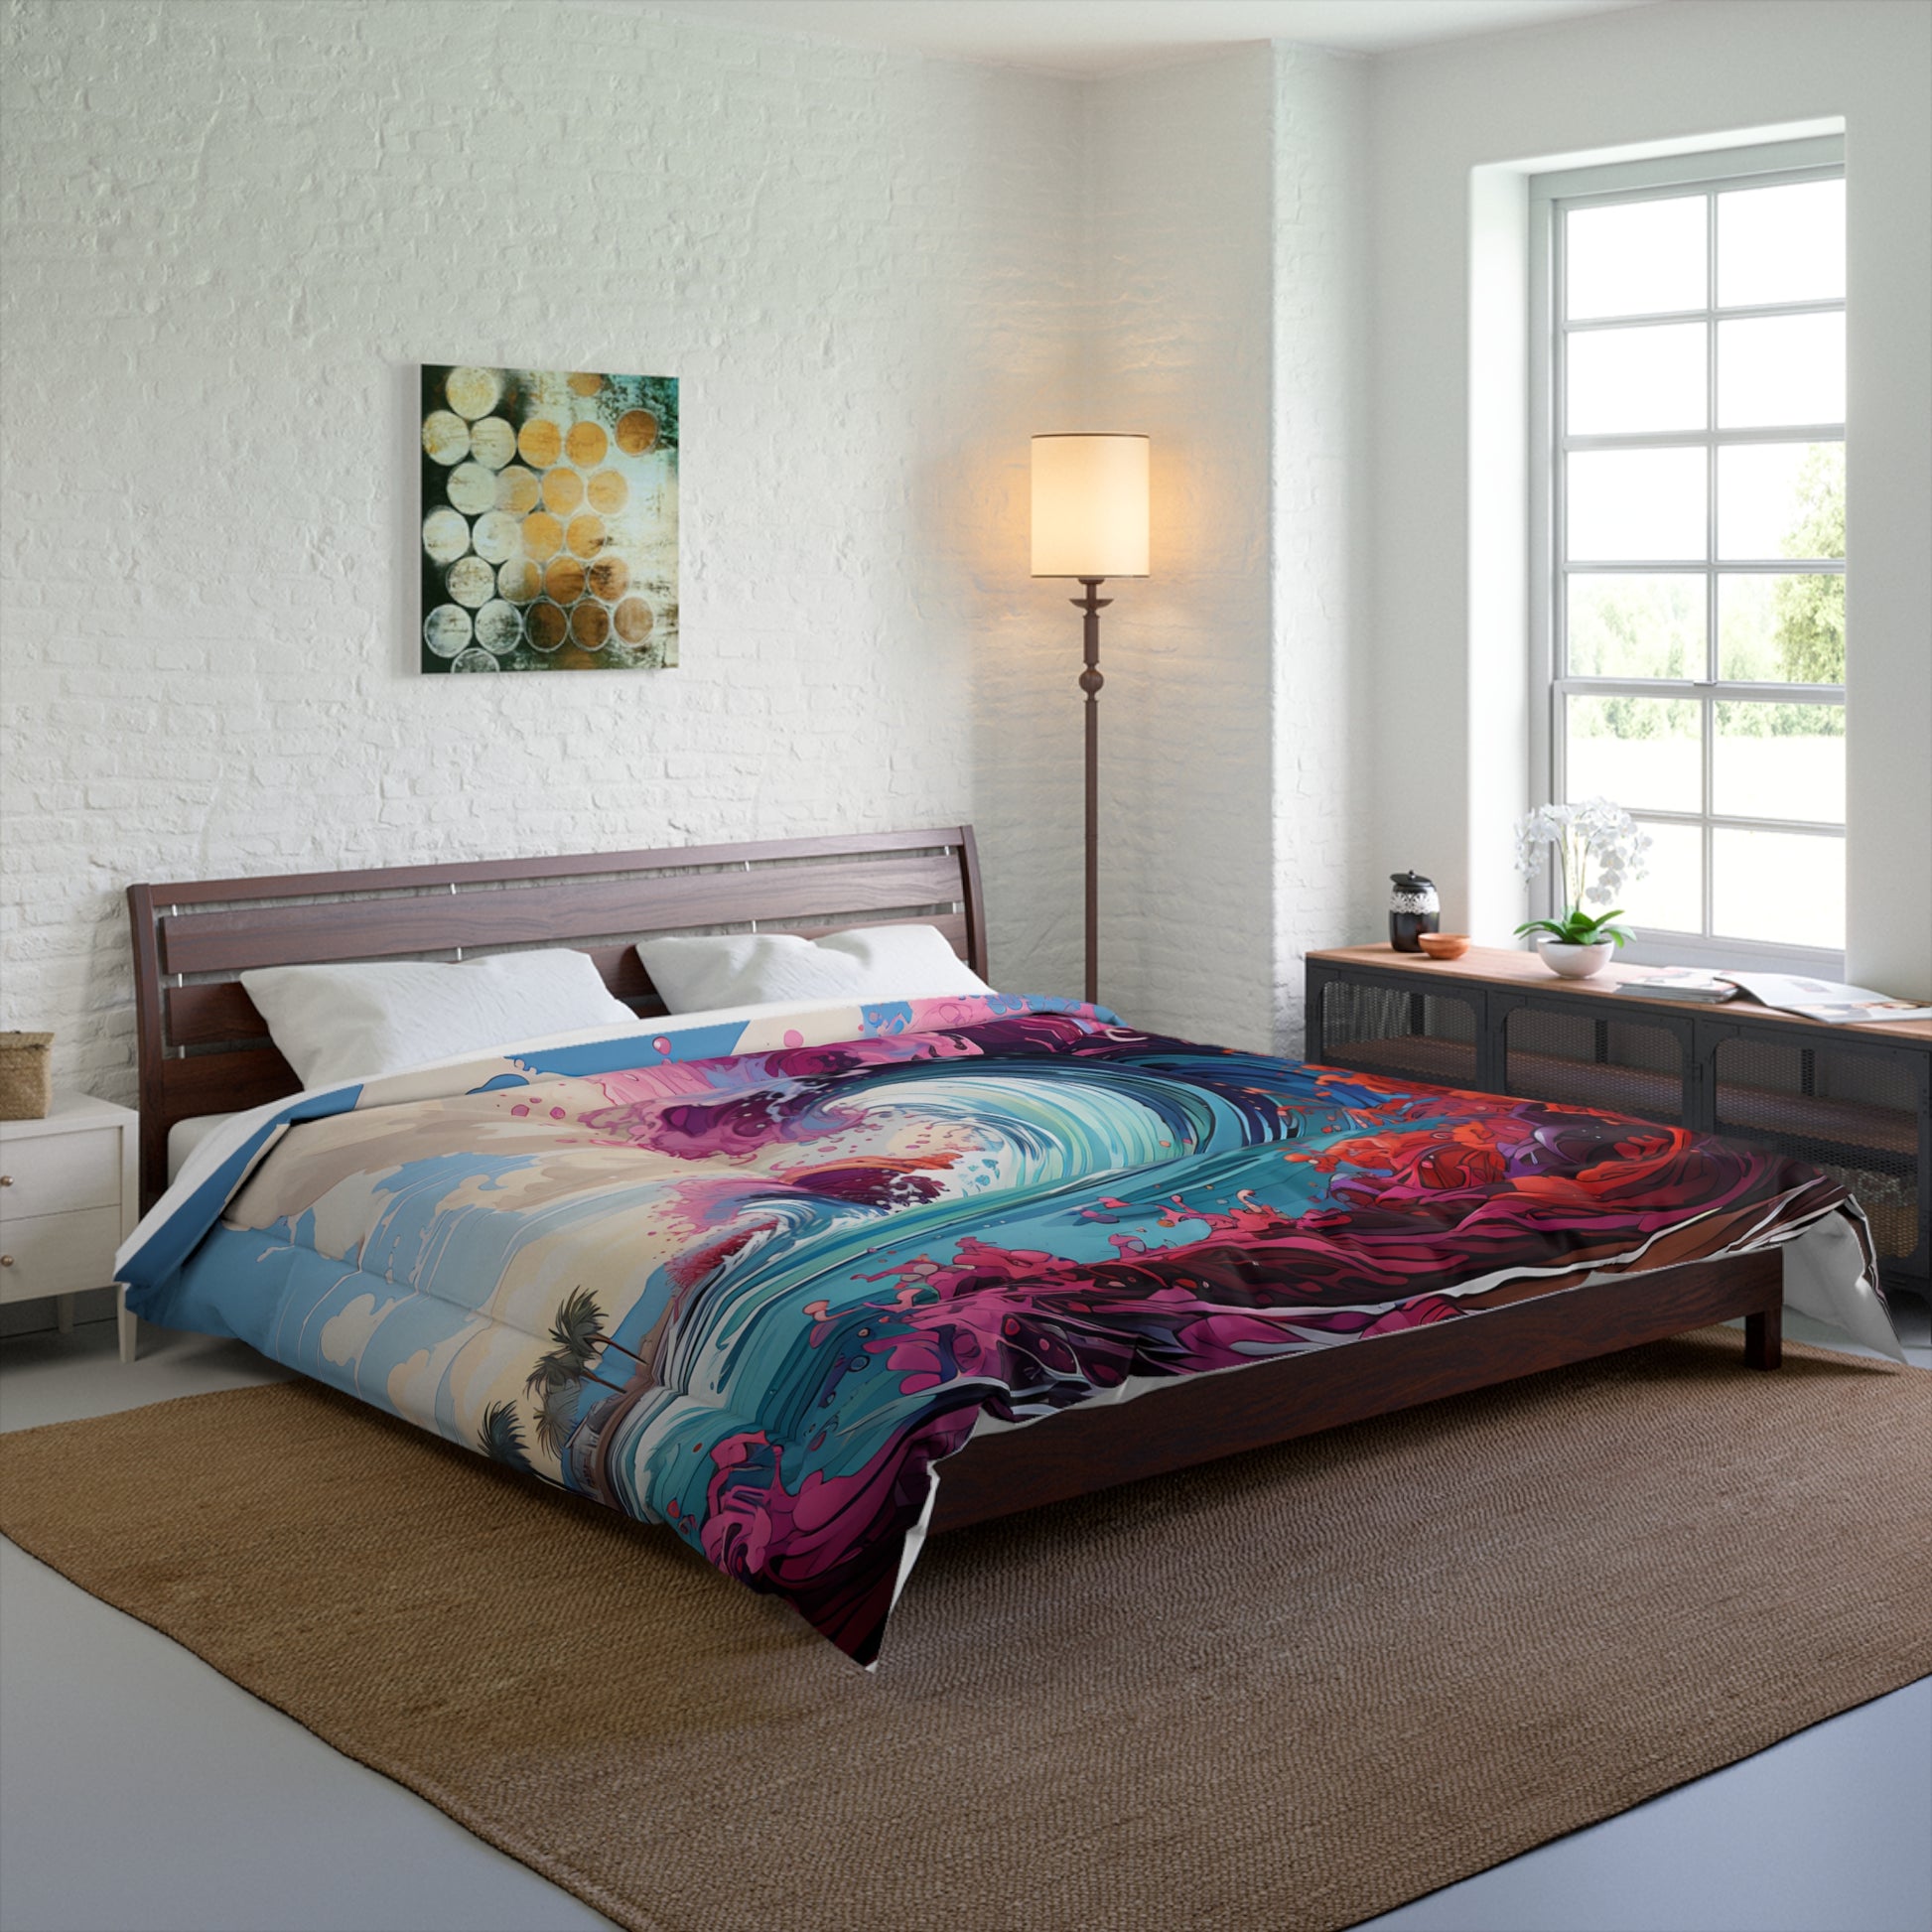 Dream in Colors of the Psychedelic Ocean with our Waves Design #003 Comforter. Sleep wrapped in art, exclusively at Stashbox.ai.